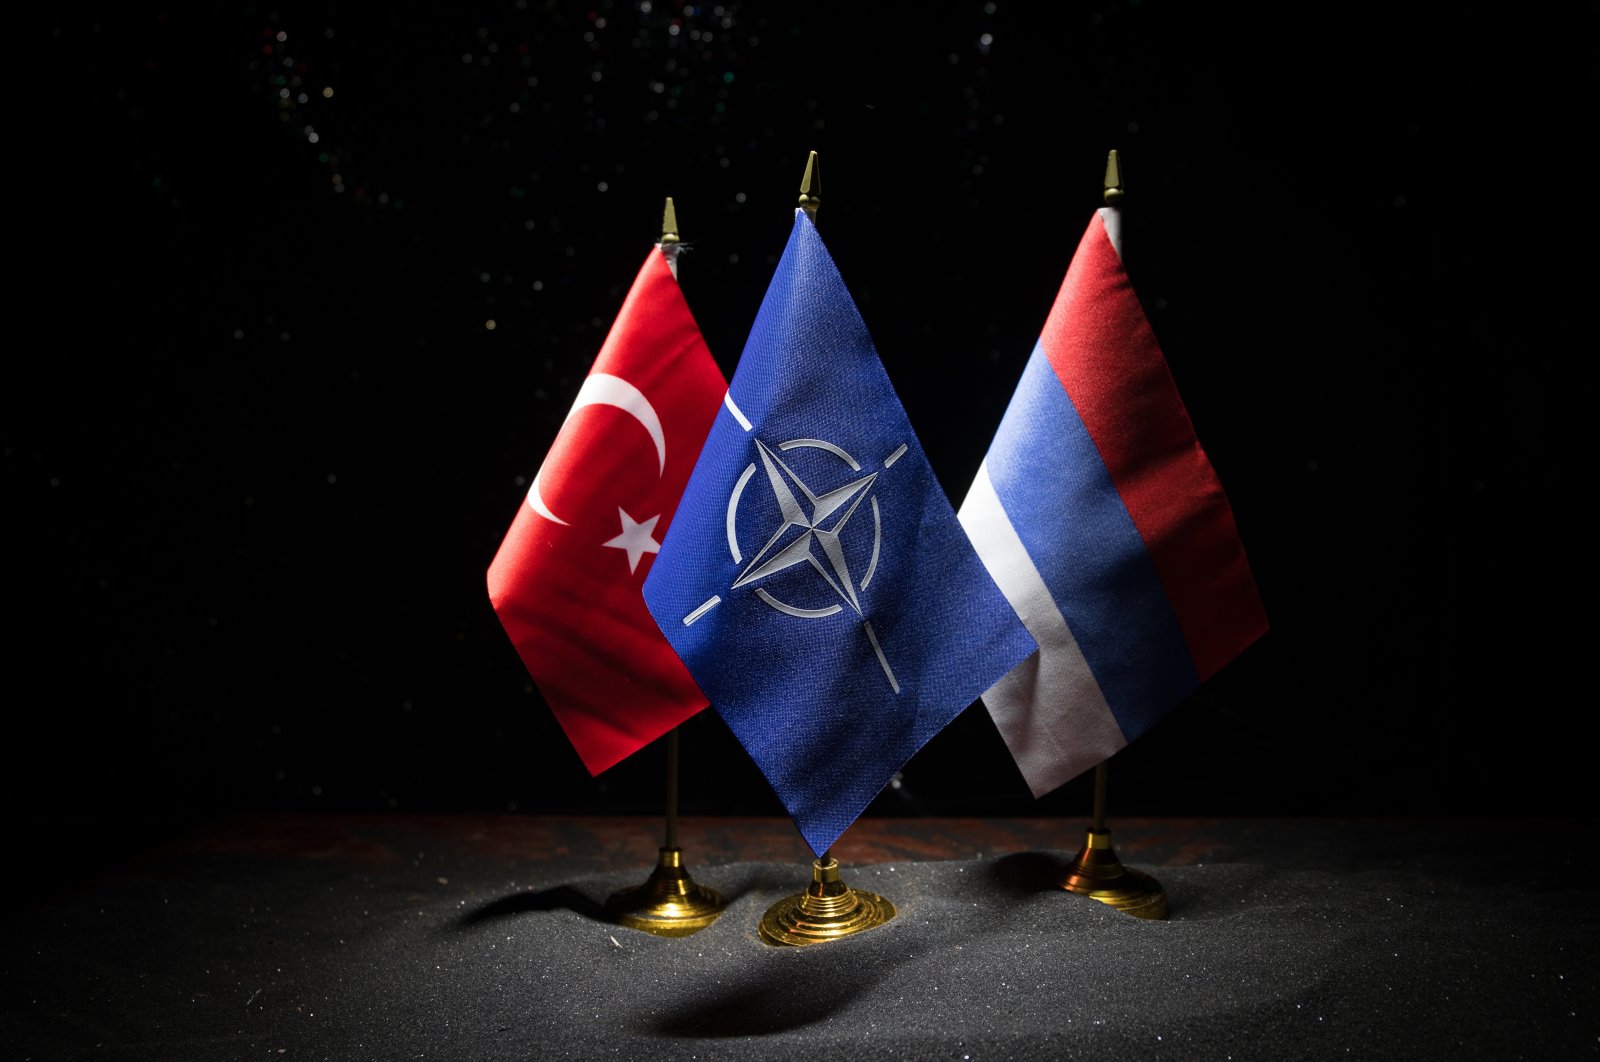 The flags of Turkey, NATO and Russia, Baku, Azerbaijan, March 3, 2020. (Photo by Shutterstock)